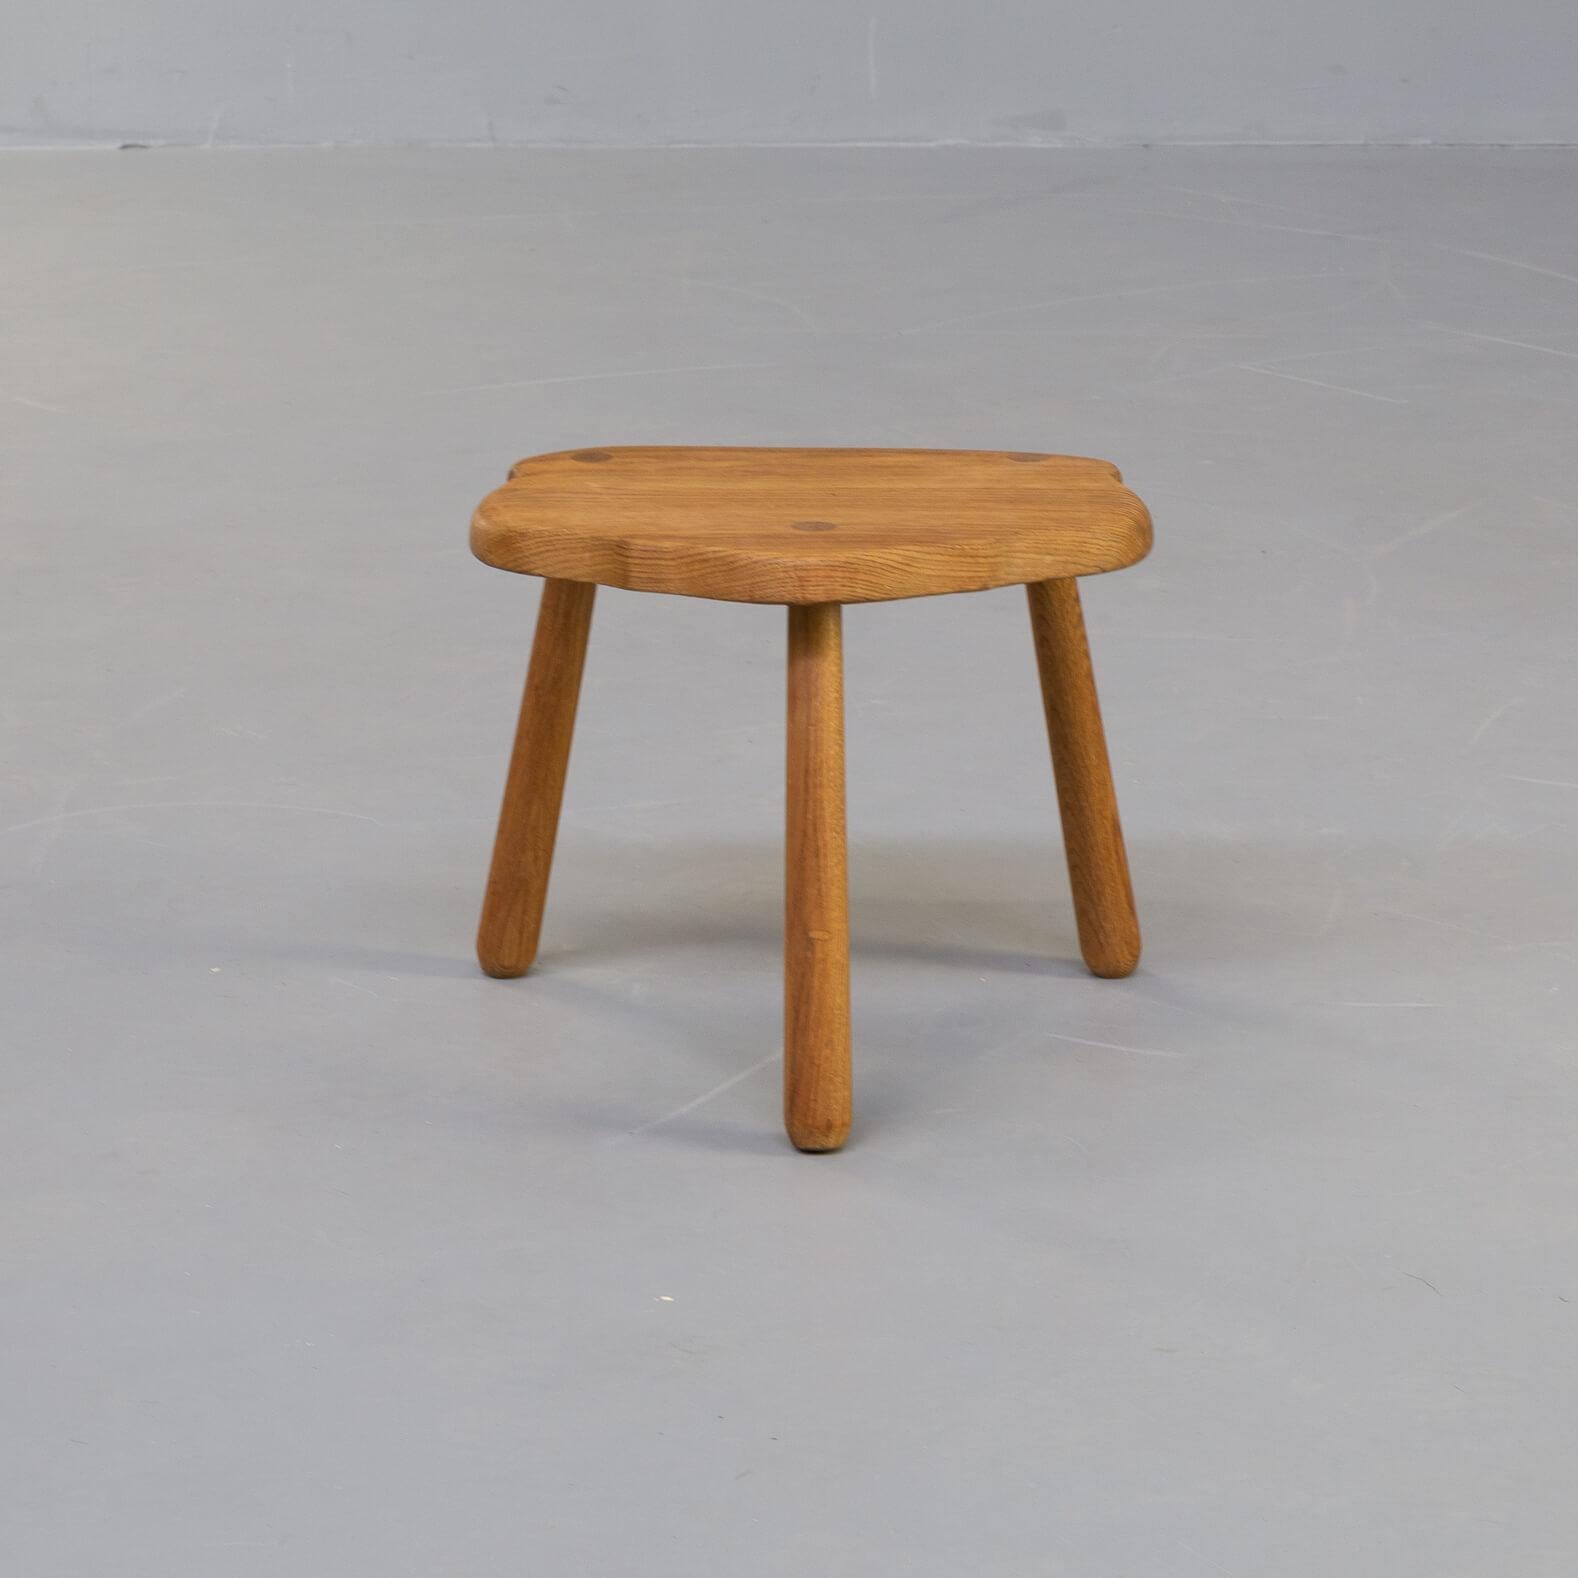 Beautfiul shaped rare model oak wooden stool, in good condition consistent with age and use.